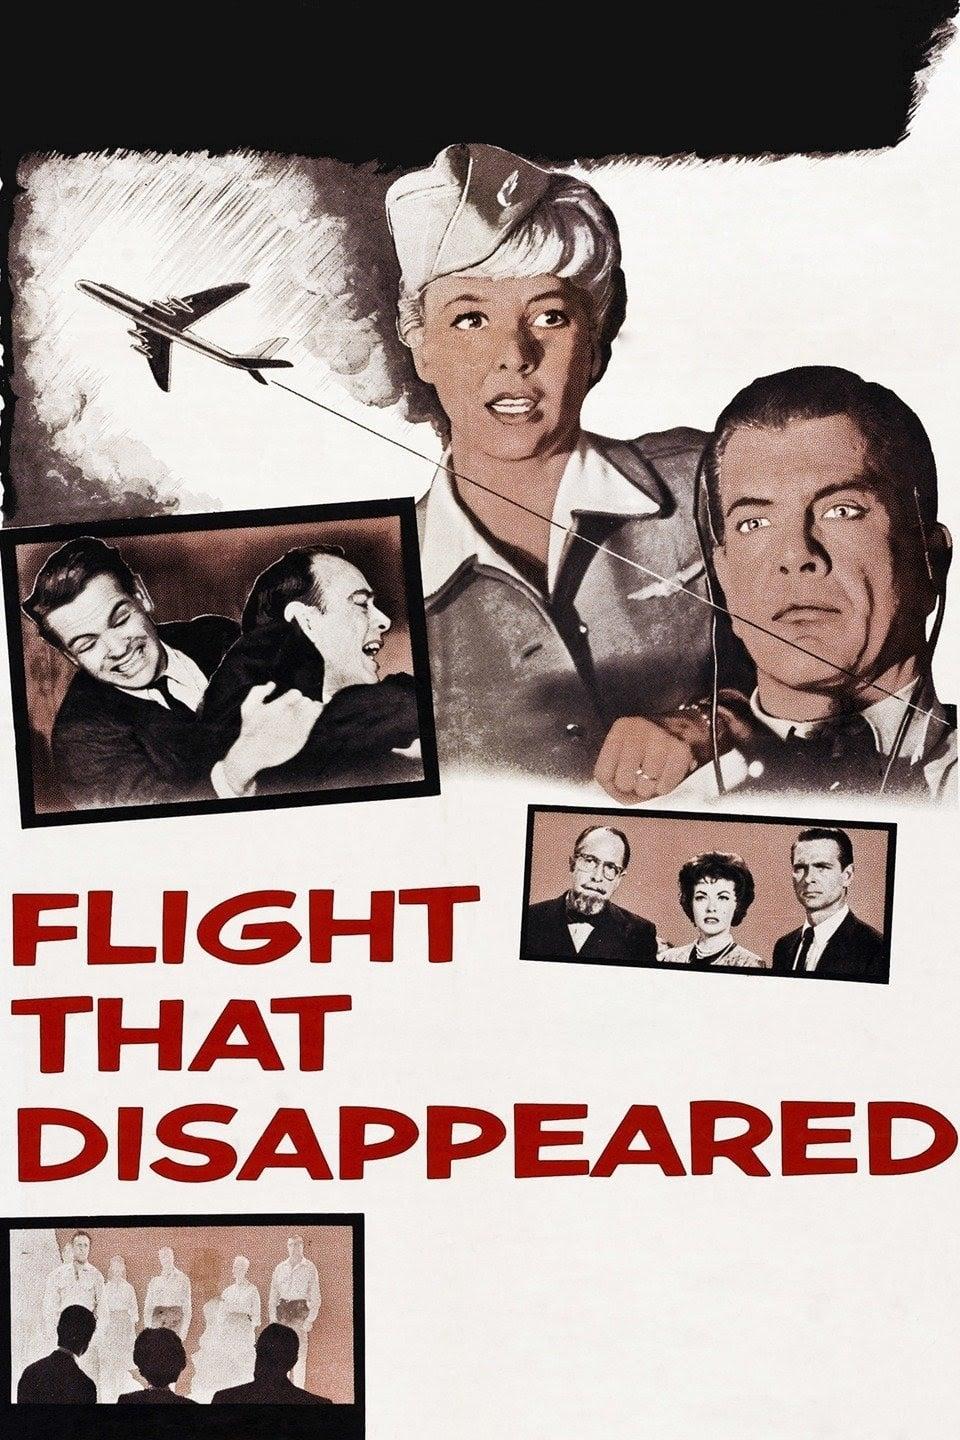 The Flight That Disappeared poster